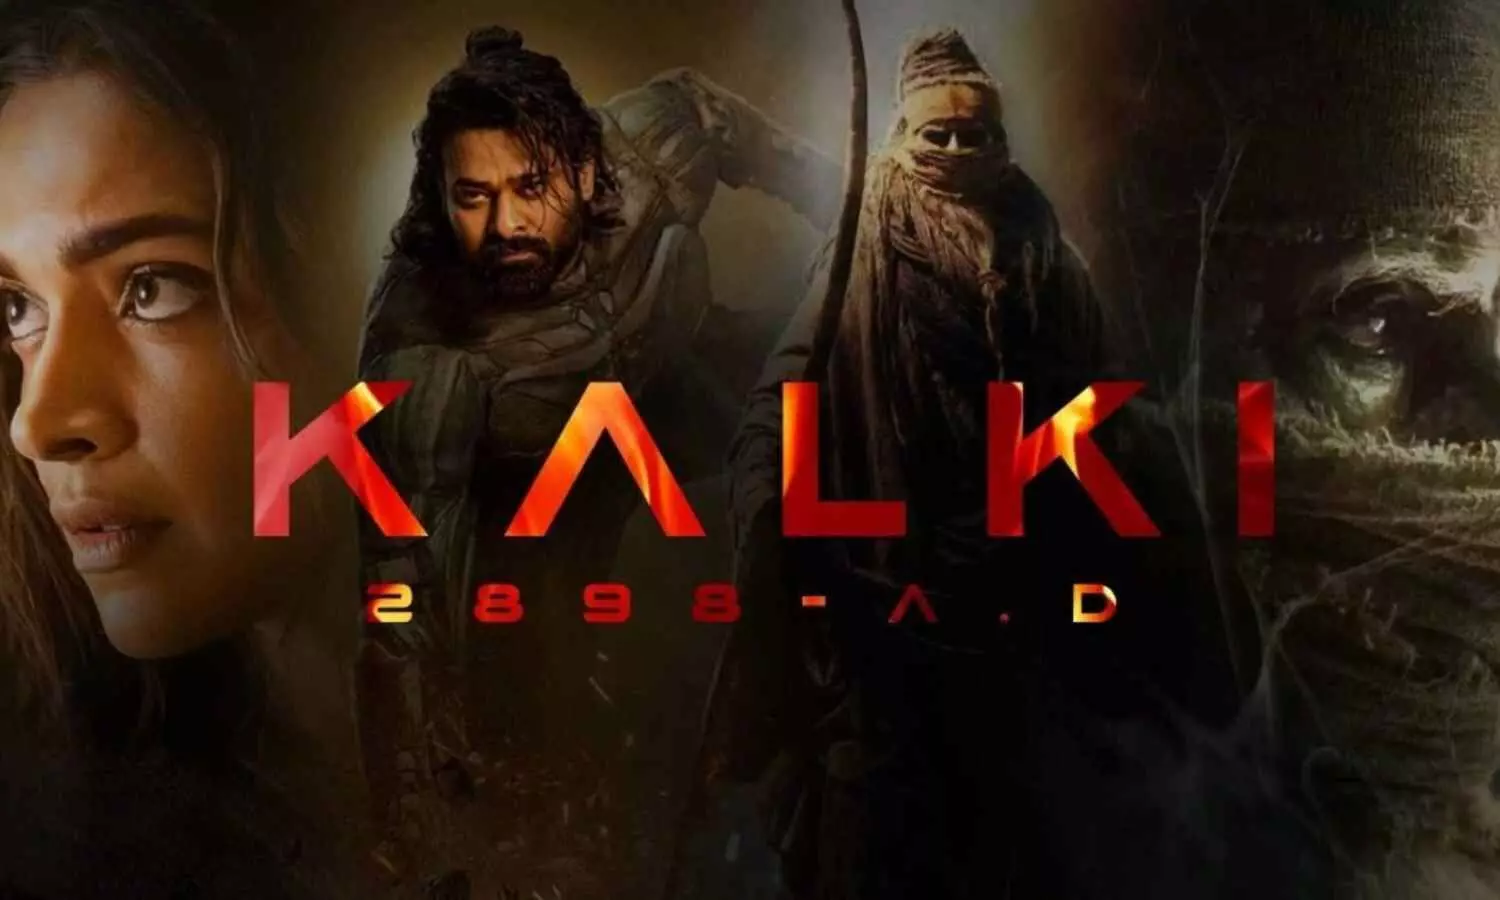 Prabhas Kalki 2898 AD to Premiere at Worlds Largest IMAX Theater